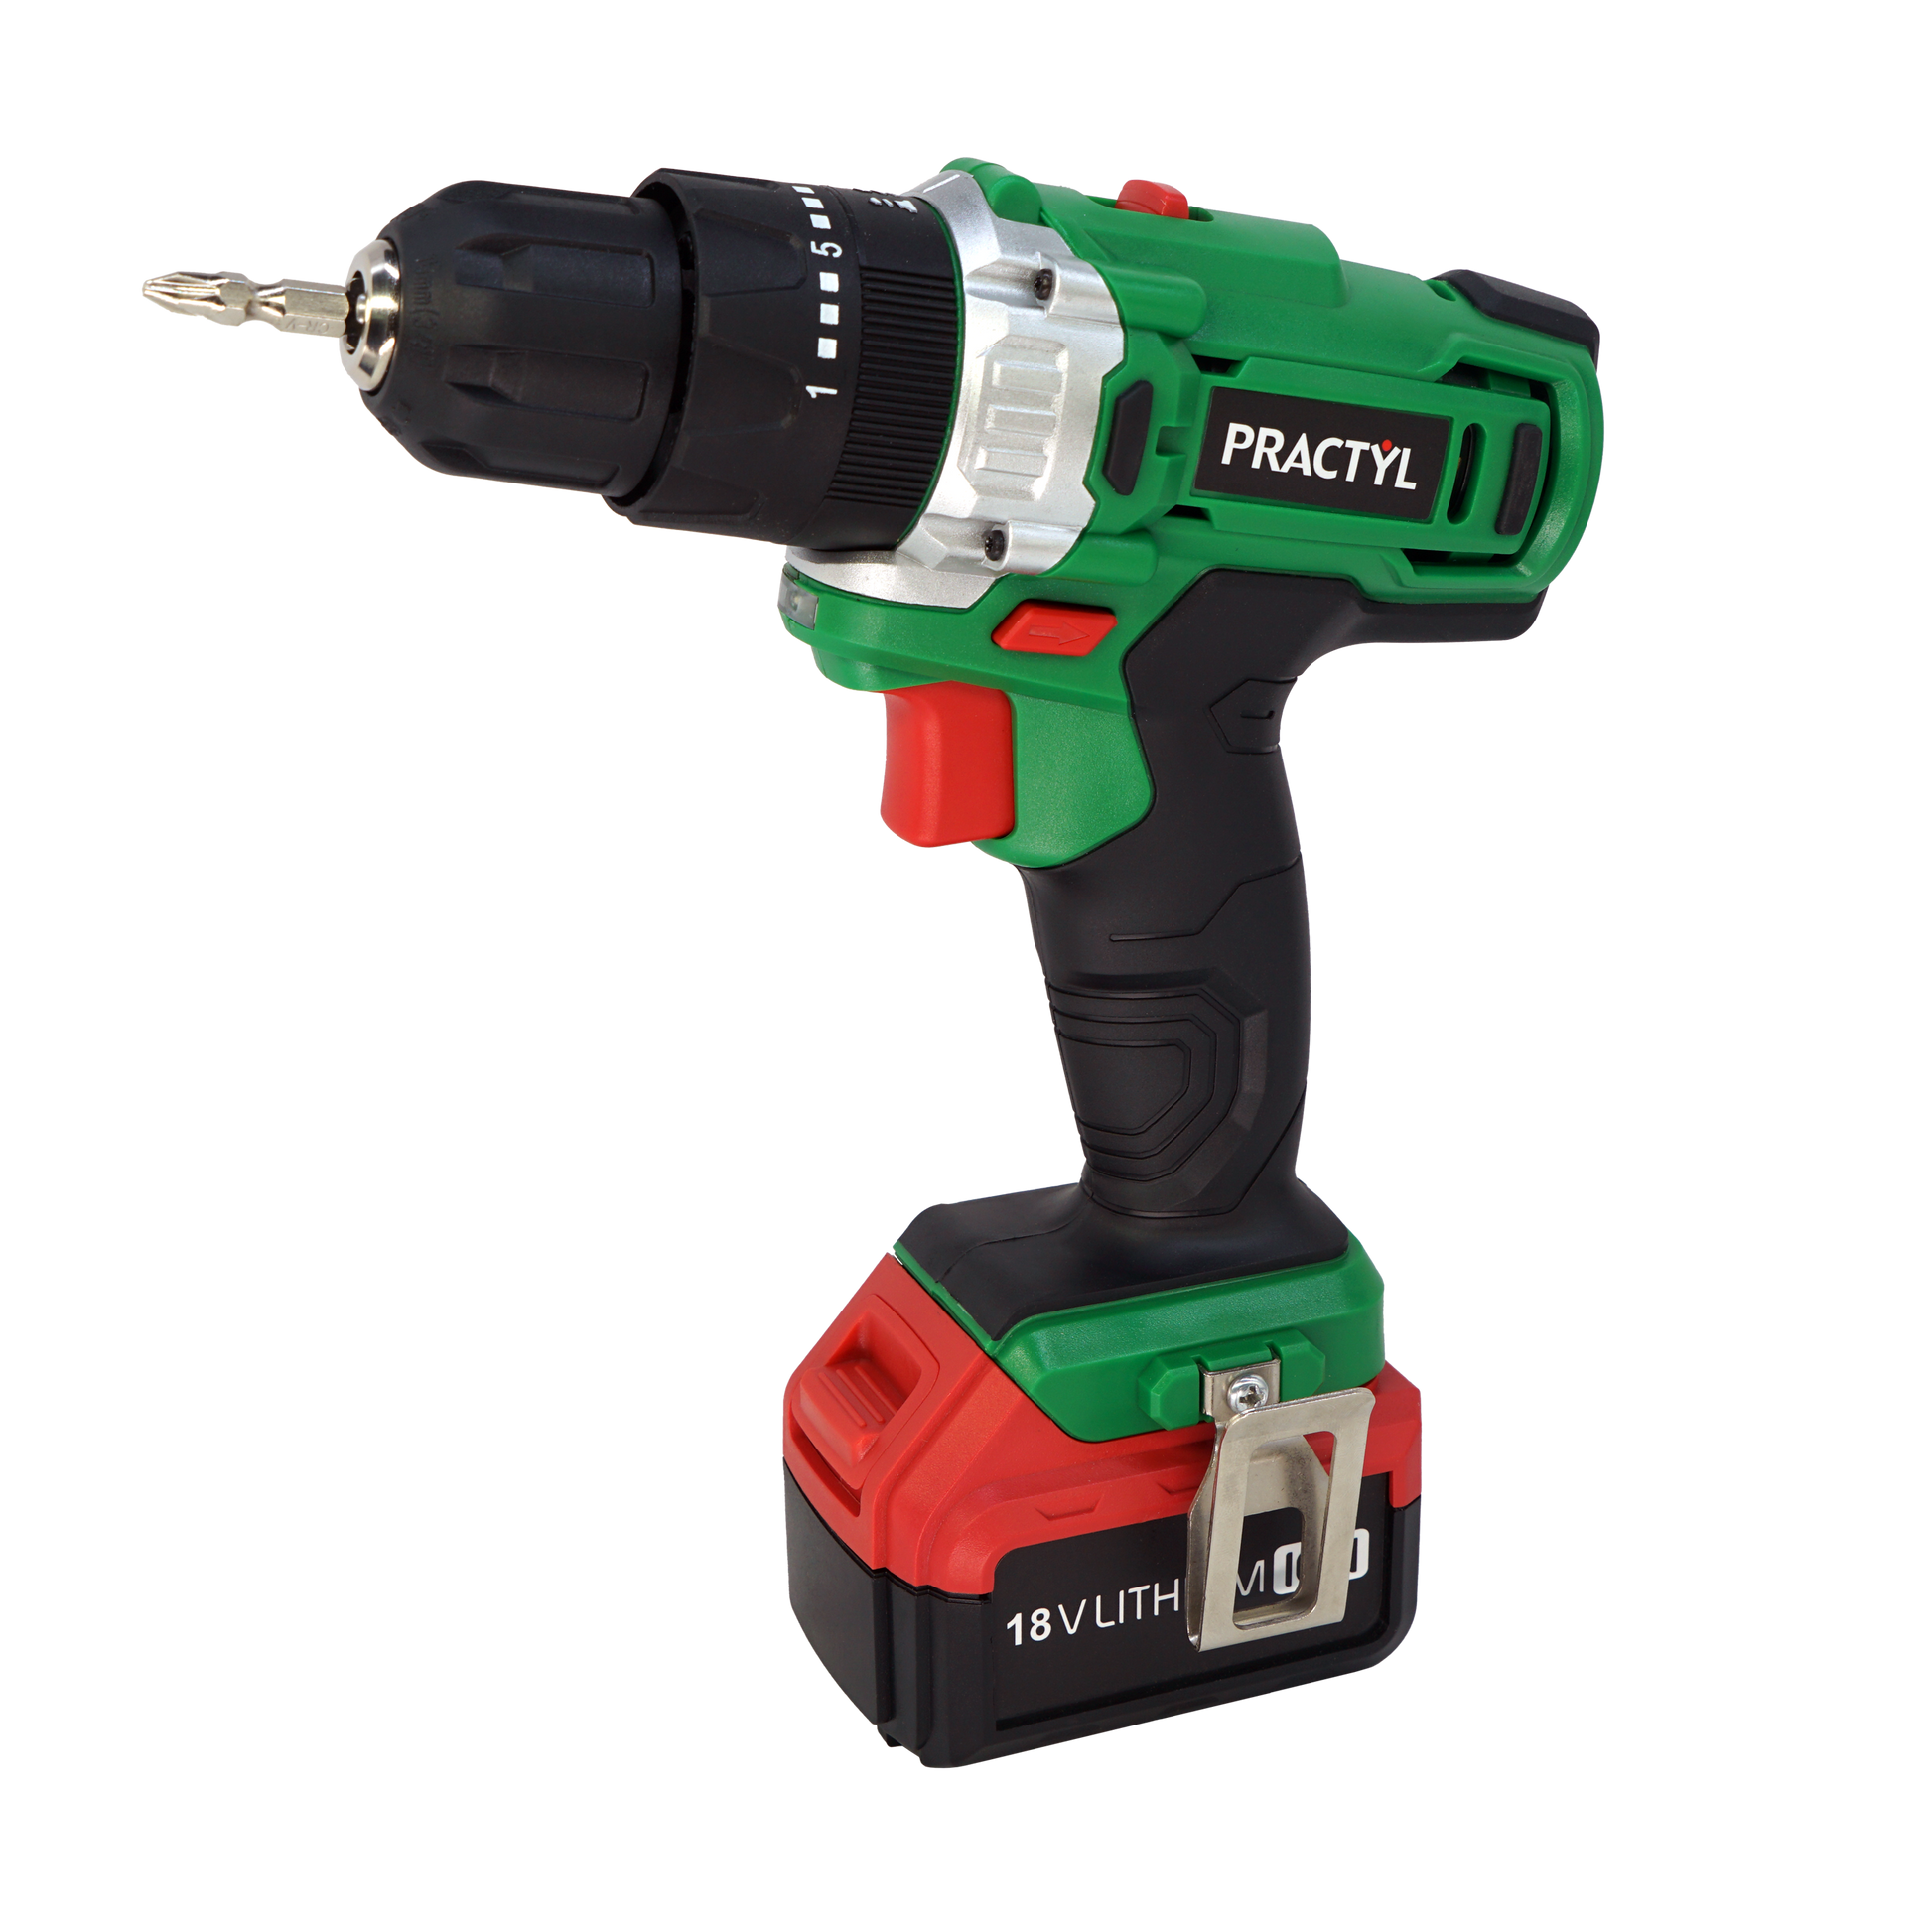 PRACTYL 18V SCREWDRIVER DRILL, 1 X 2 AH BATTERY, BATTERY CHARGER